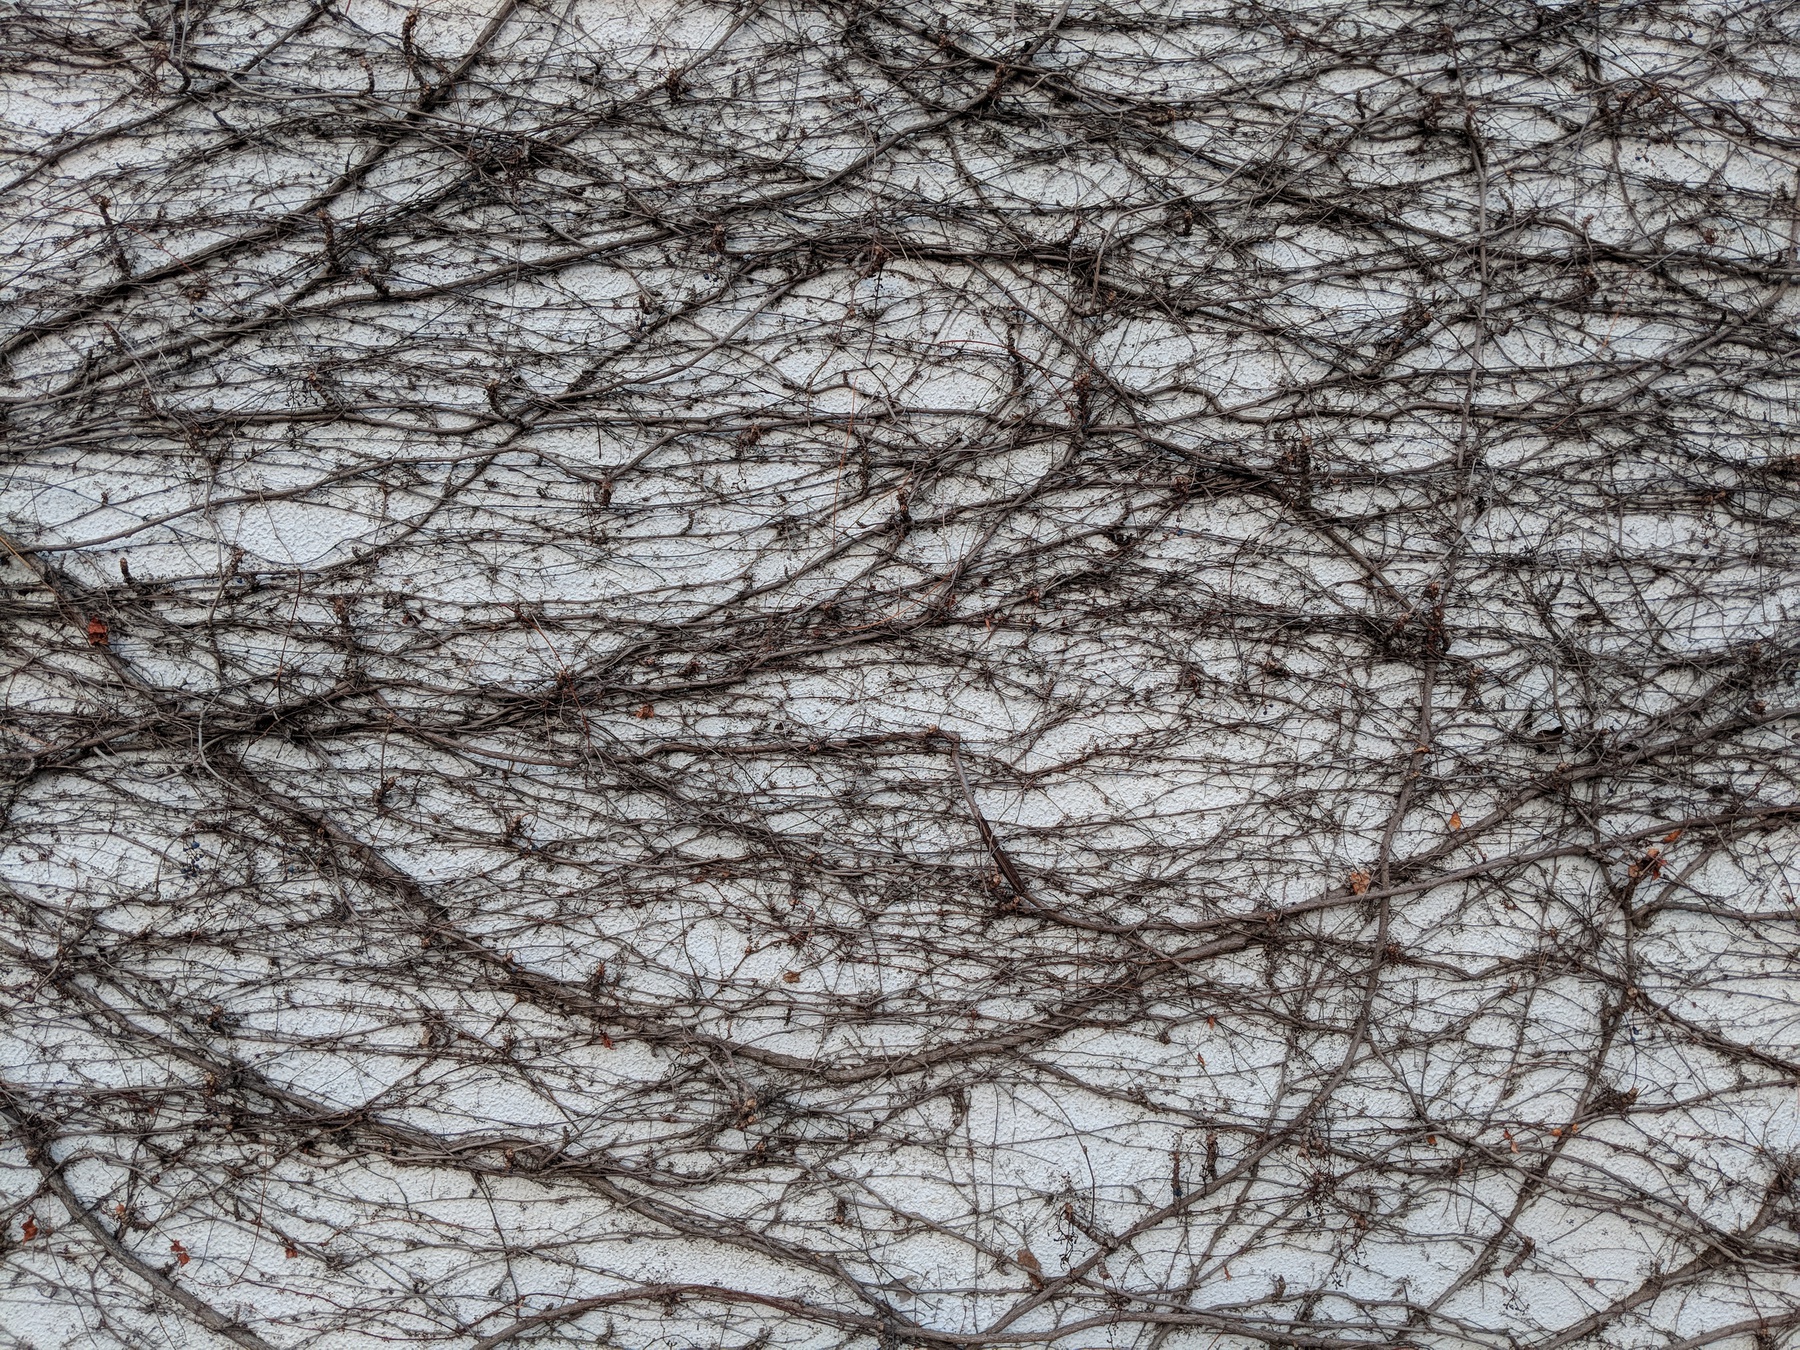 Bare, brown vines cover a white wall in a dense webbing.